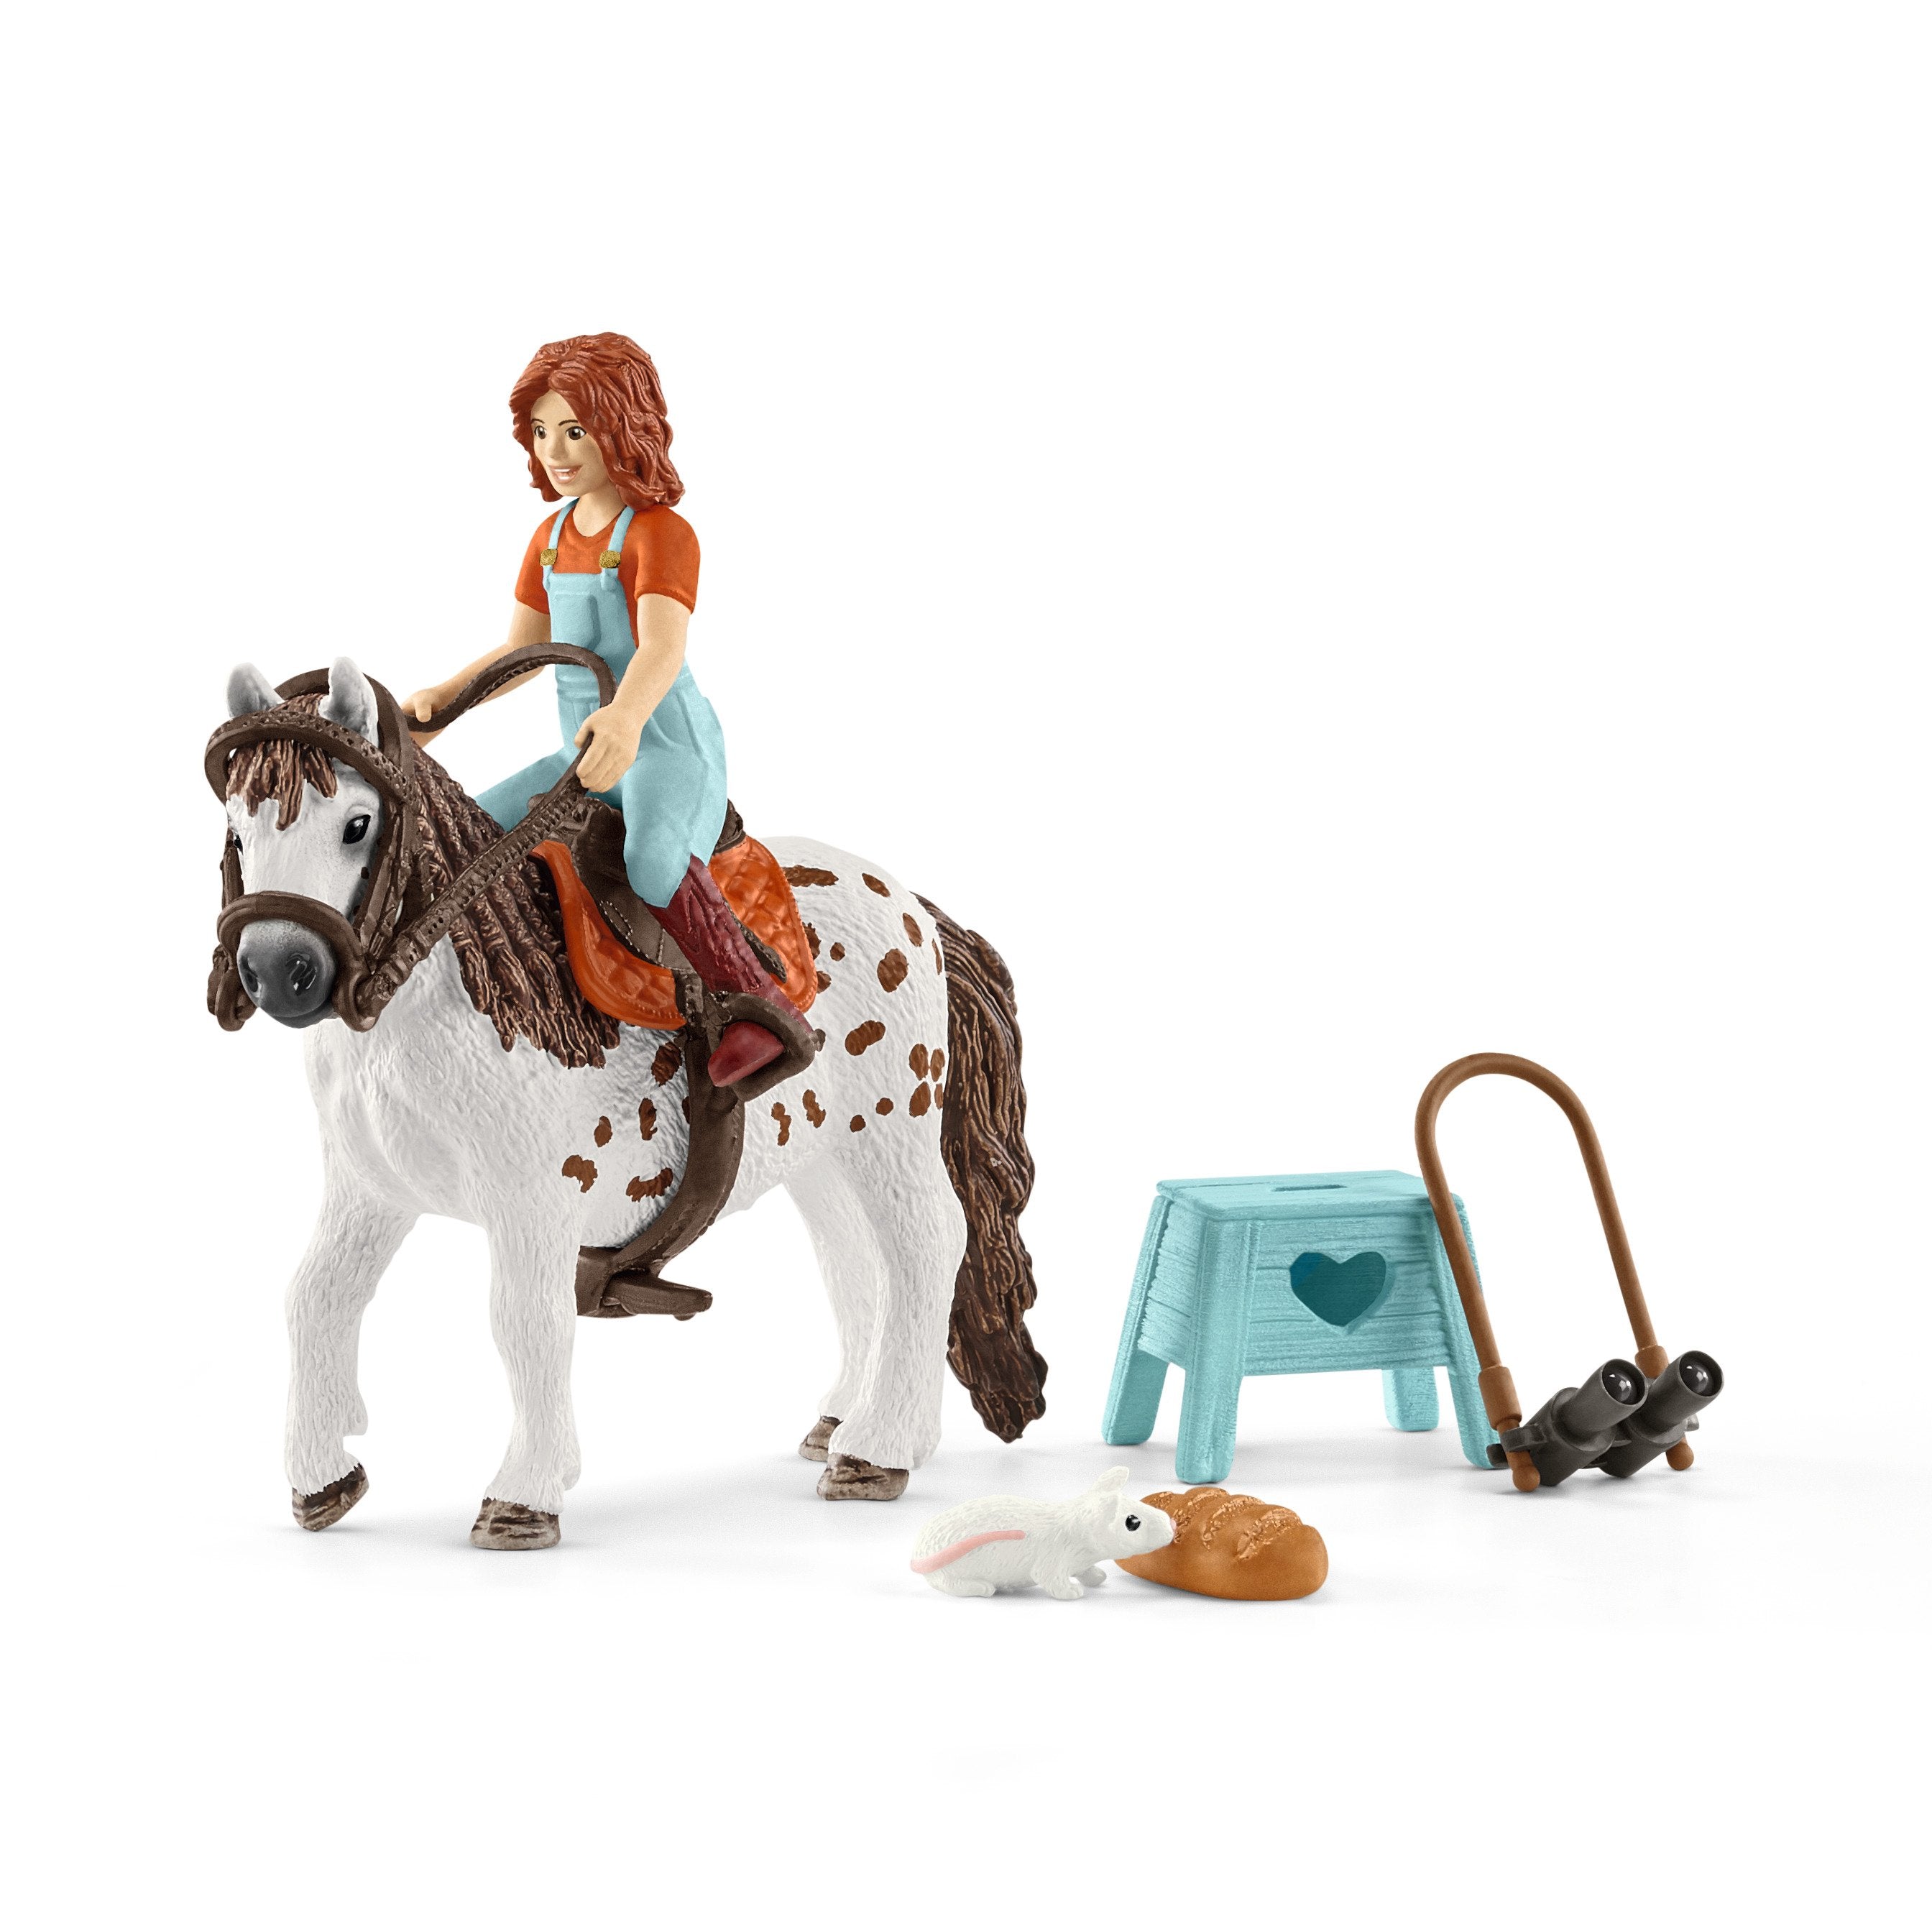 SL42518 Schleich Club - Figure Horse and Accessories – Brushwood Toys